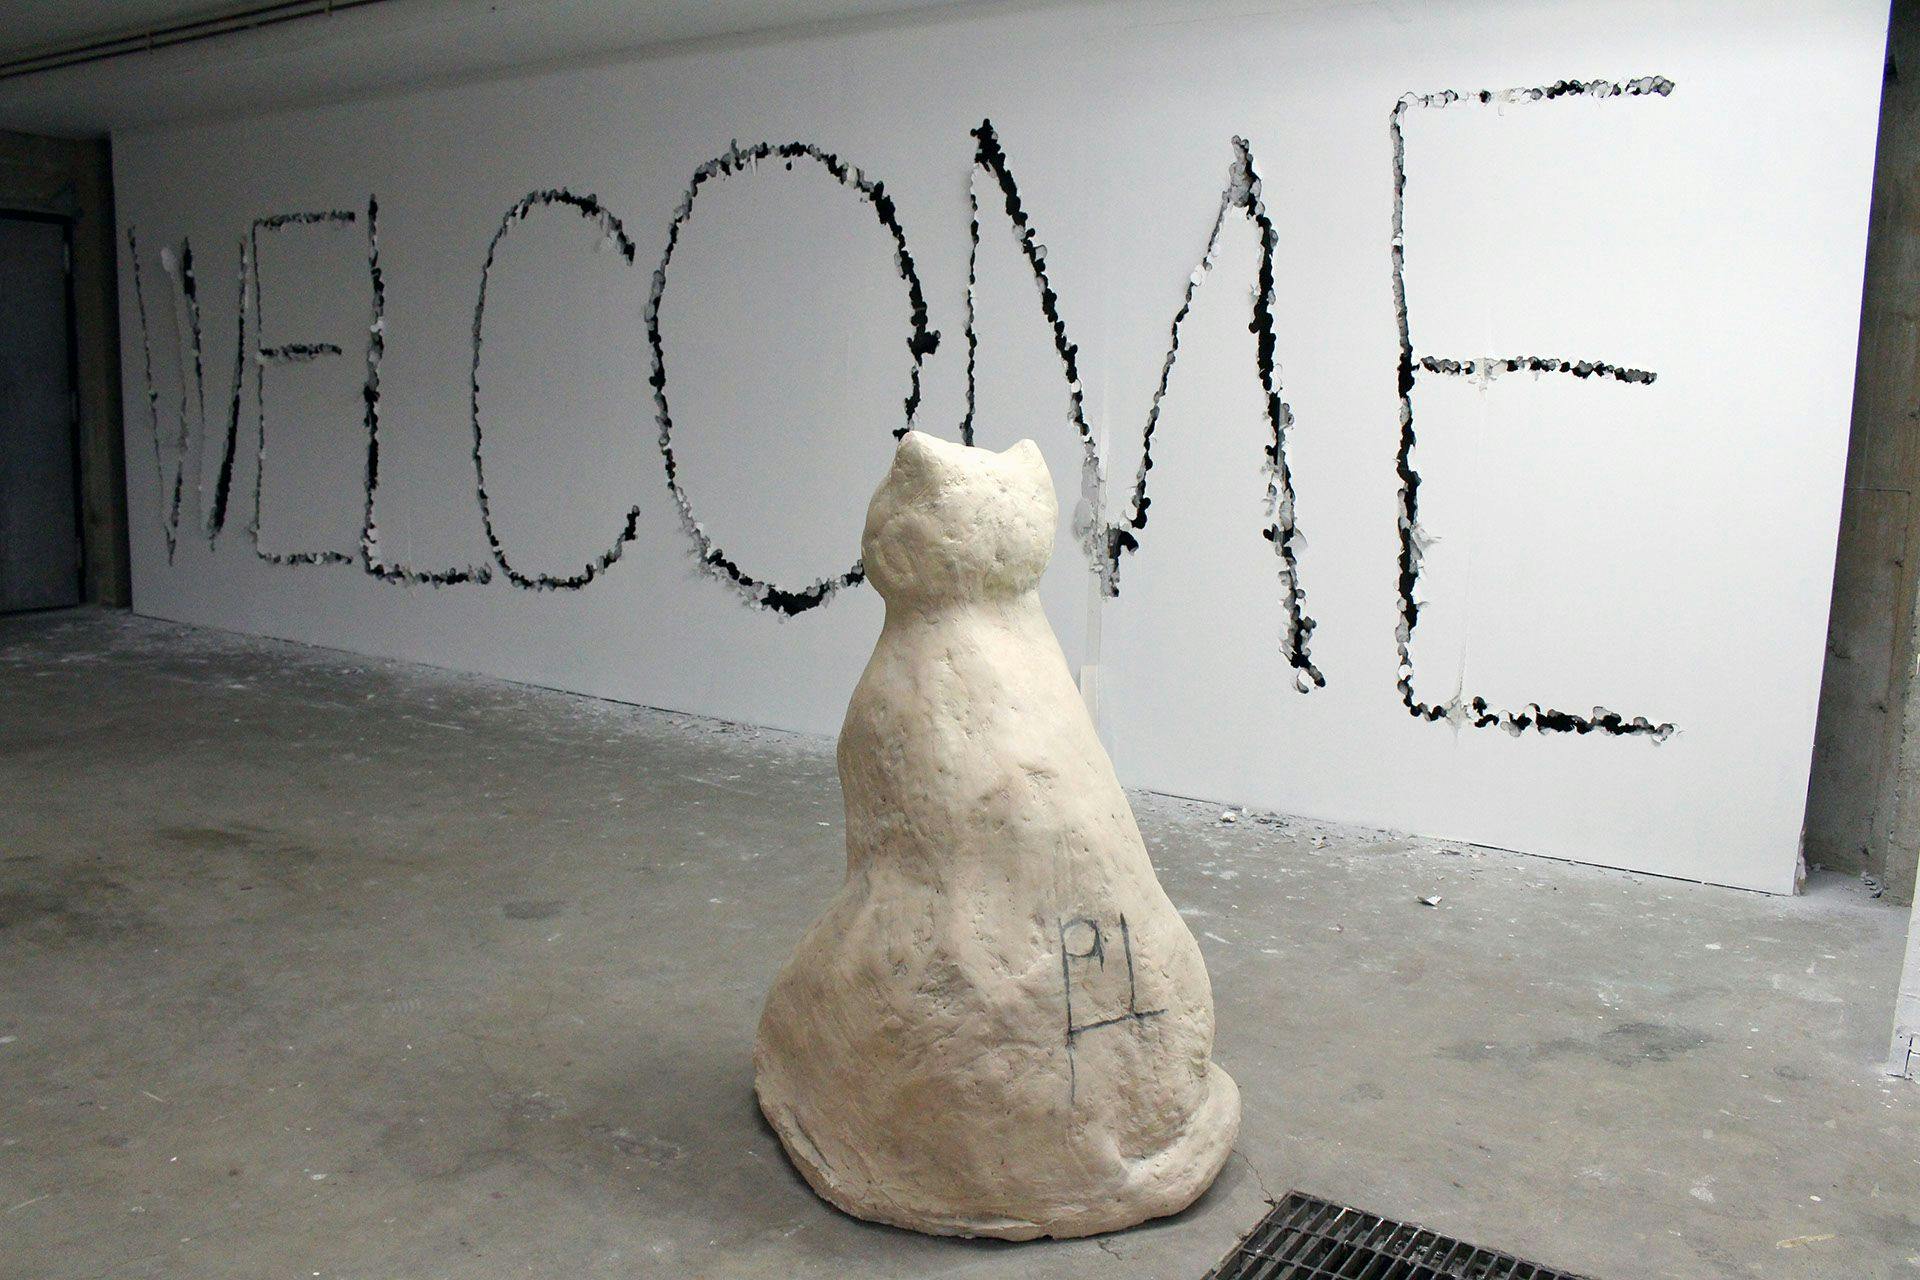 WELCOME, 2015

holes in a wall 

dimensions variable 